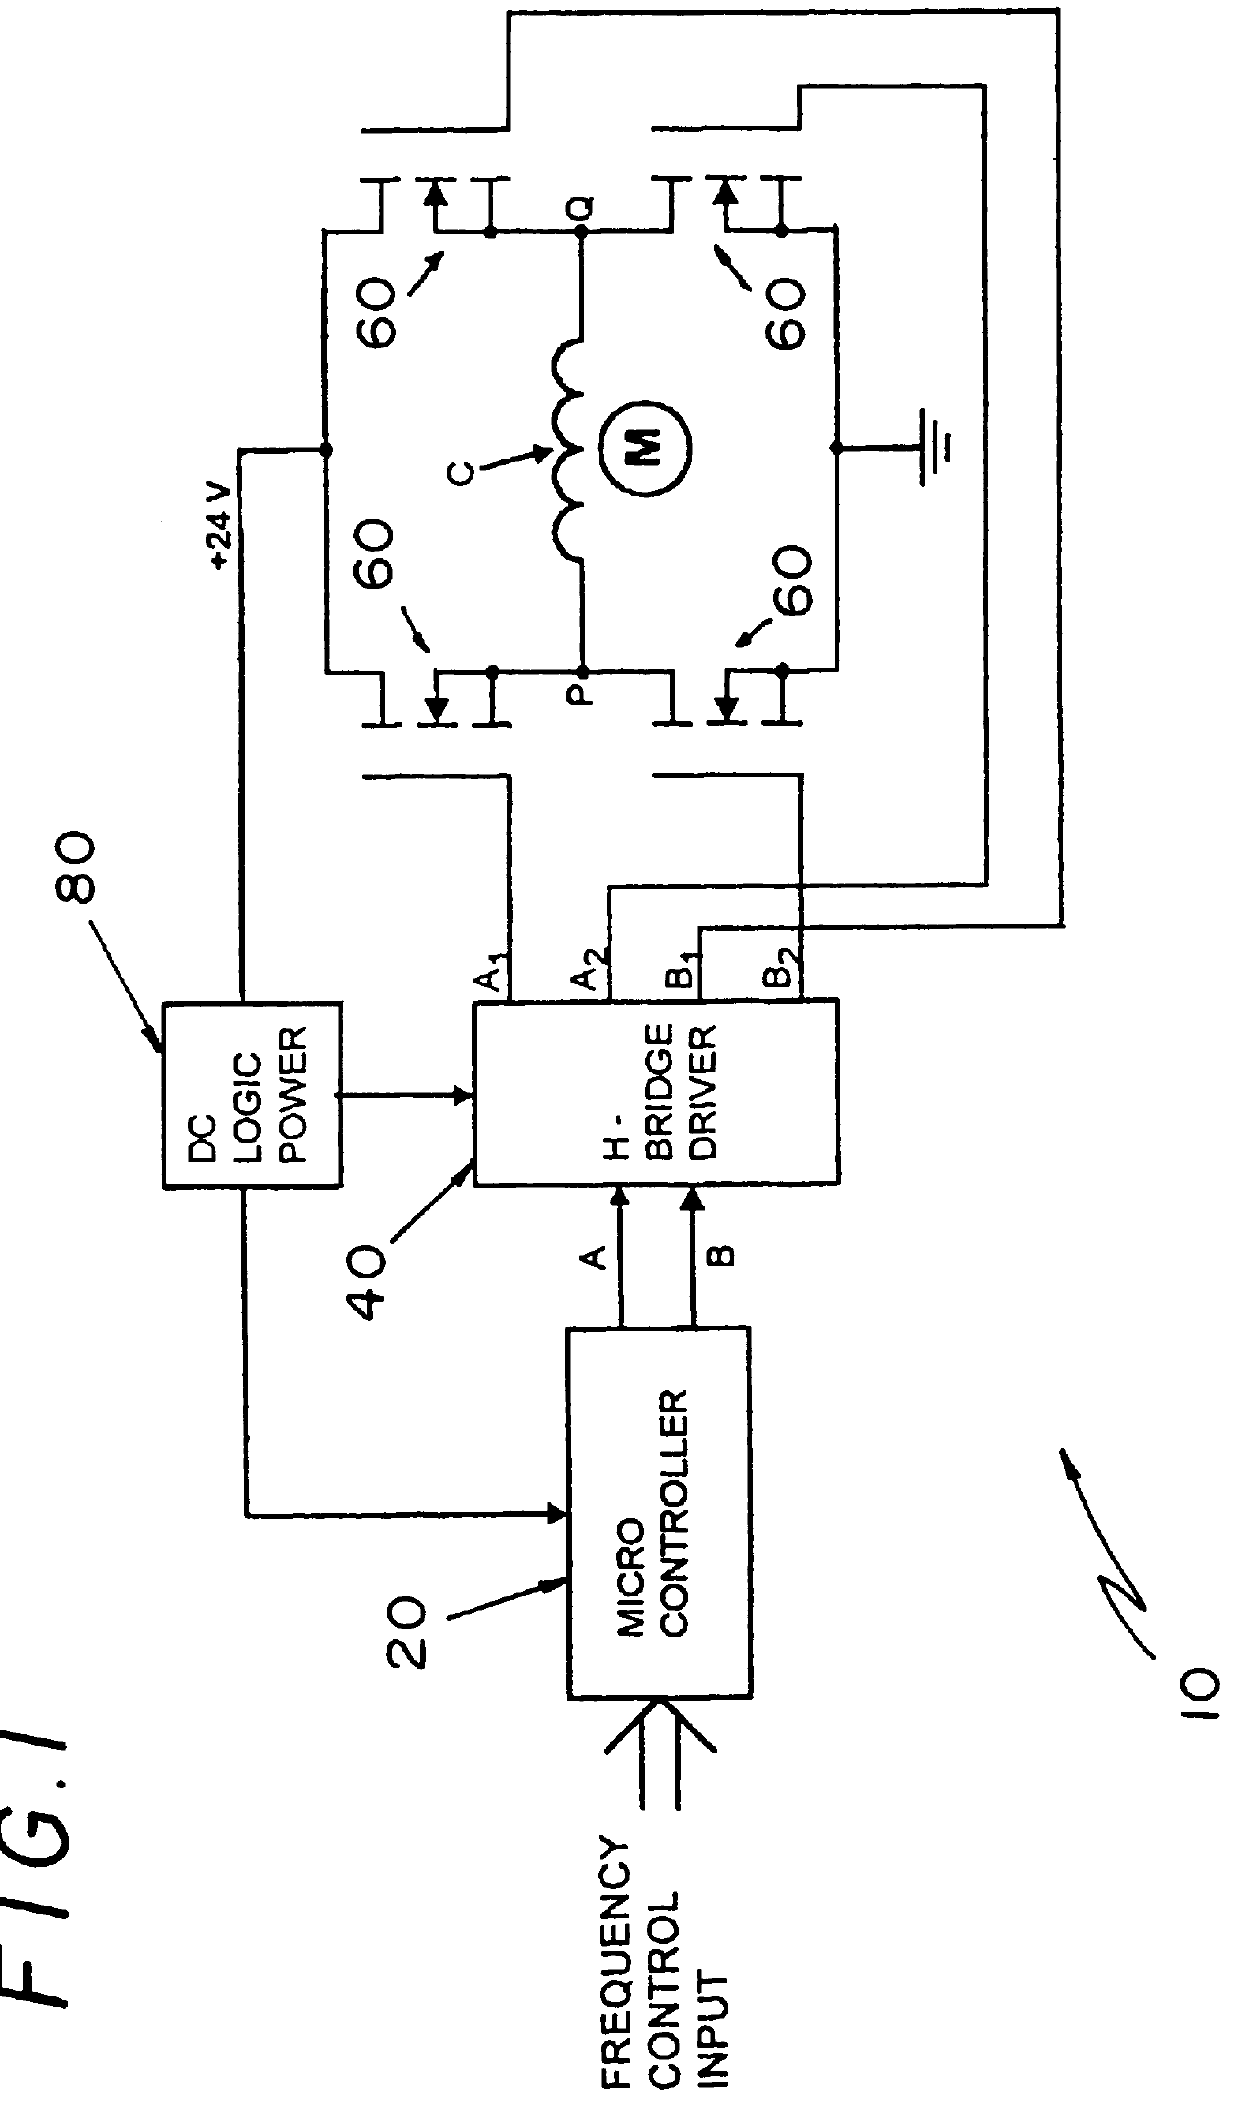 Variable speed control for AC induction motors